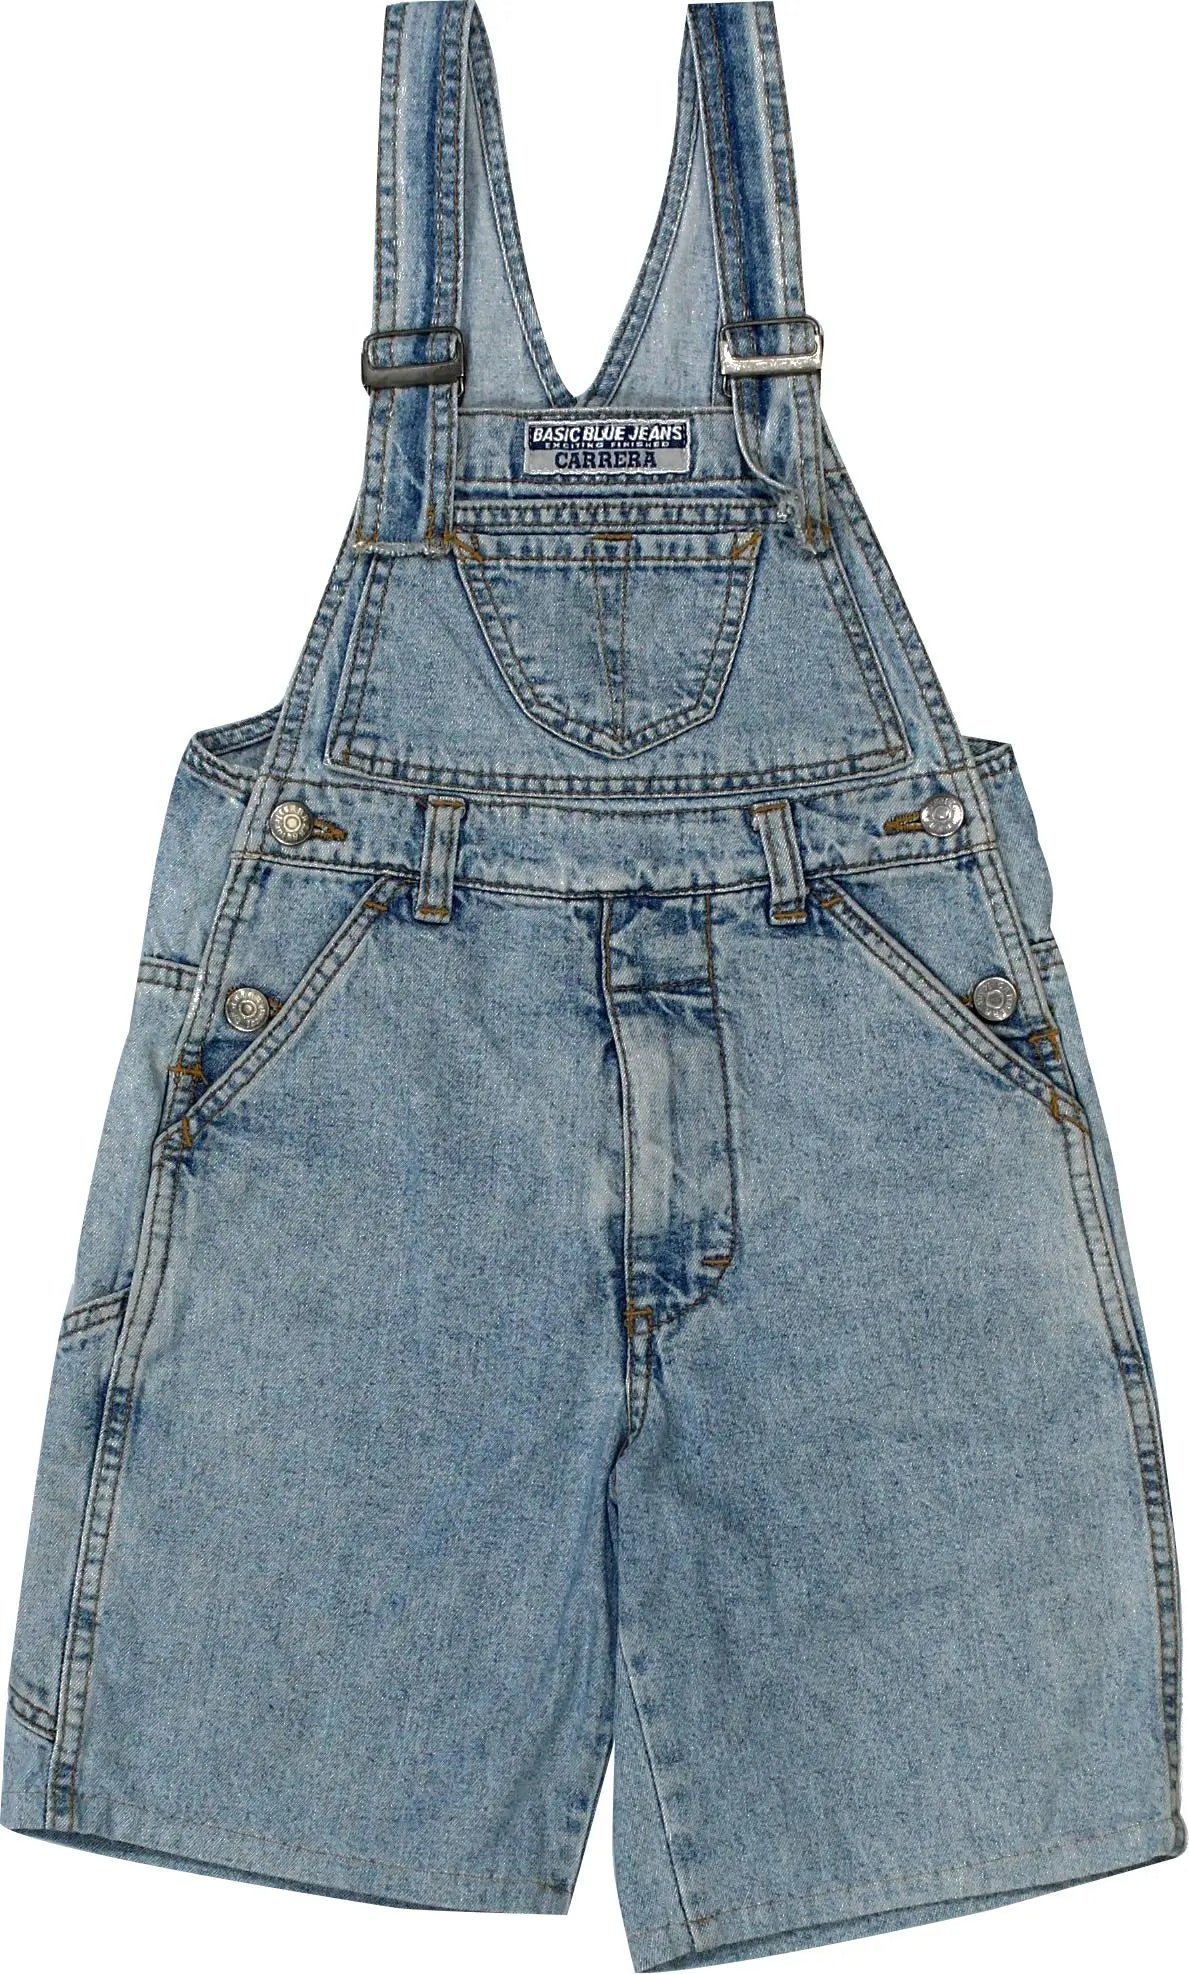 Carrera - Blue Dungarees by Carrera- ThriftTale.com - Vintage and second handclothing